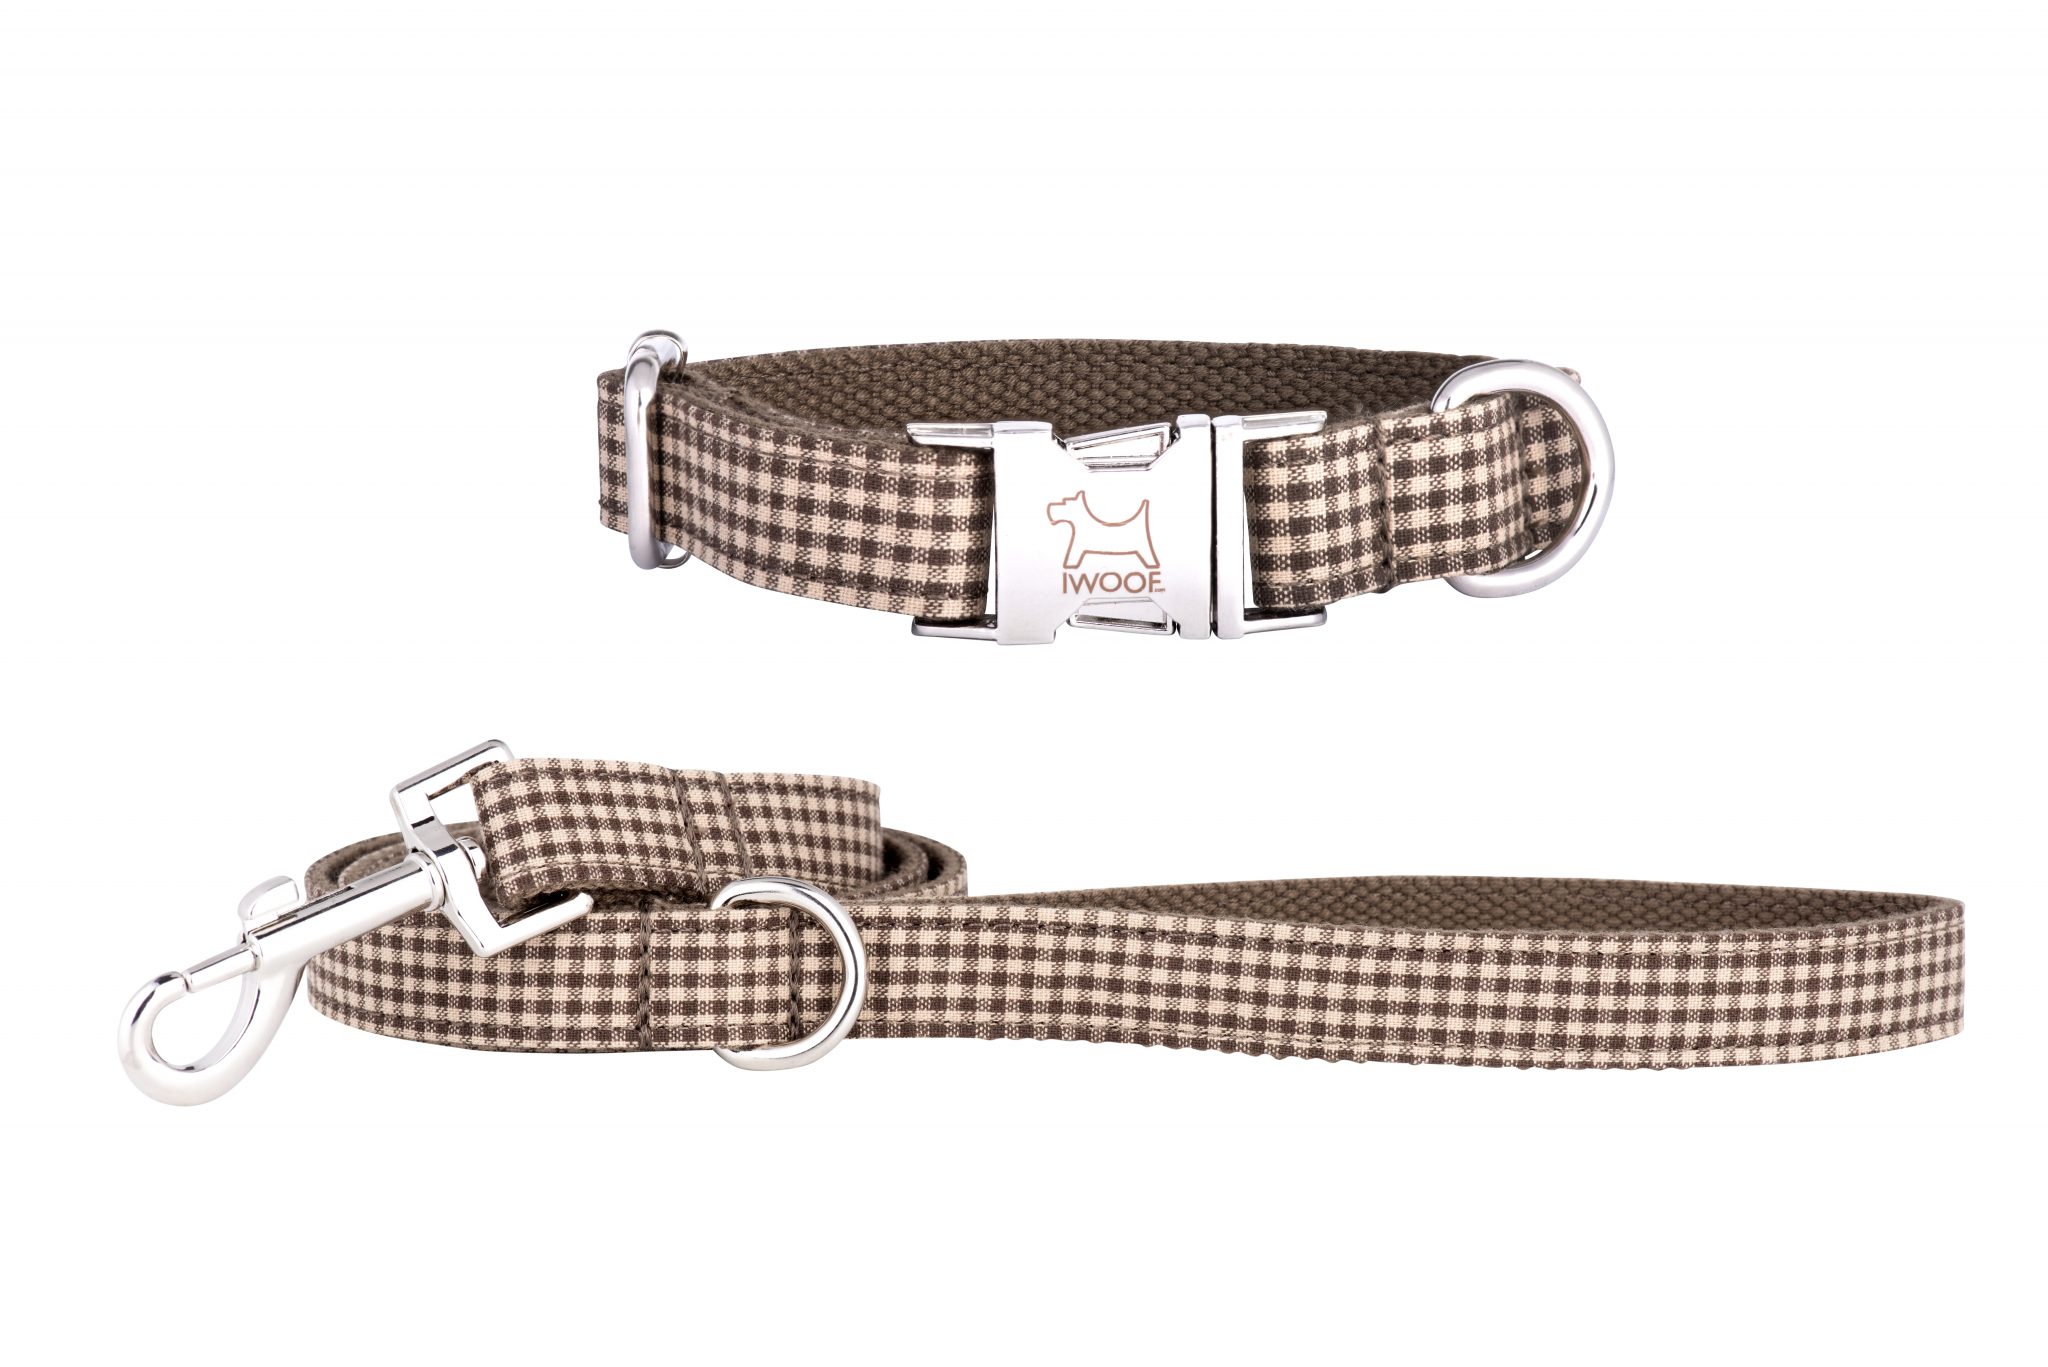 DOG TOOTH Designer Dog Collar and Lead set in Silver